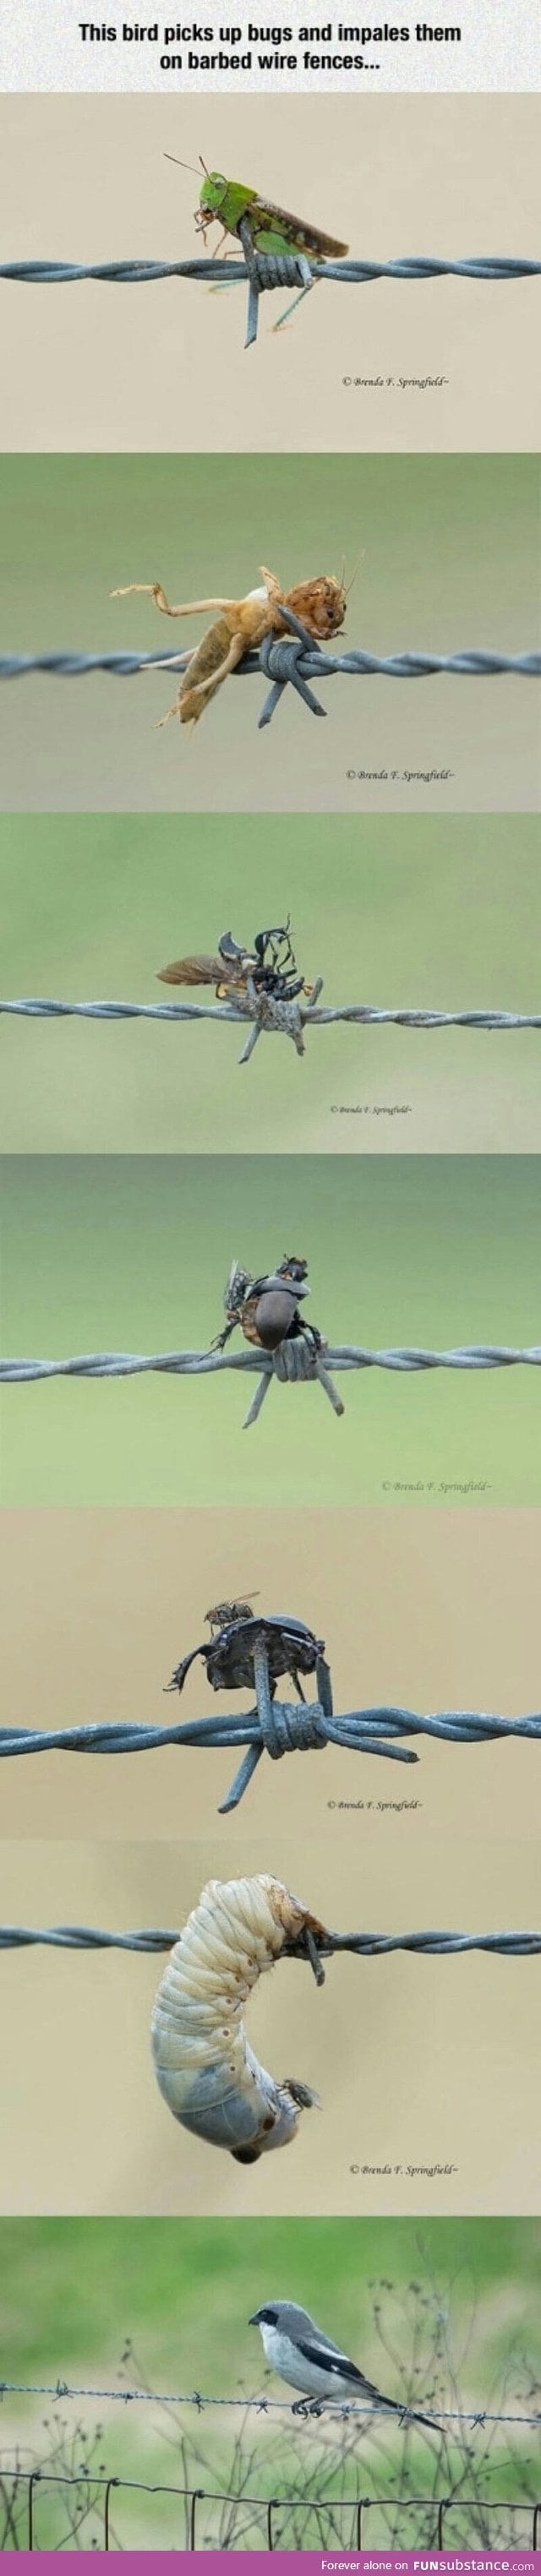 Bird impales its preys on a barb wire